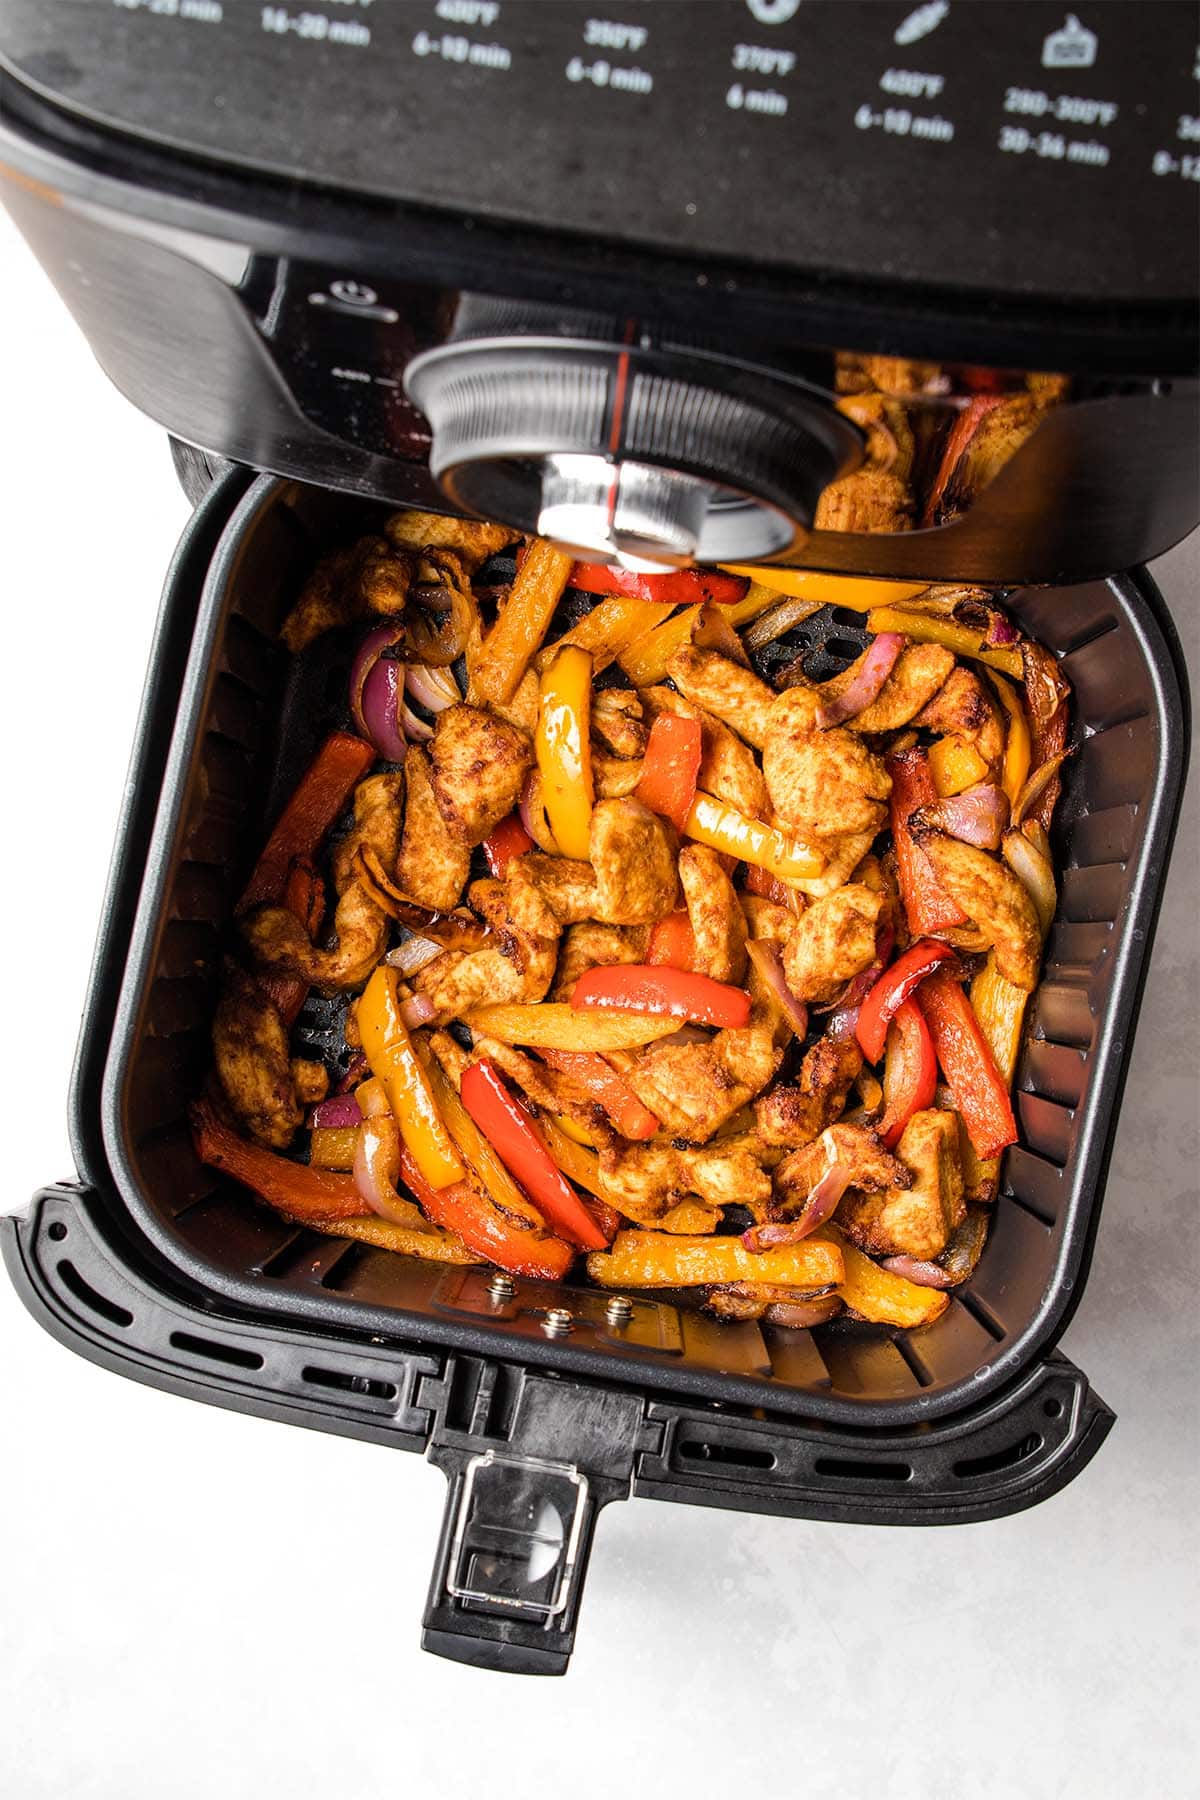 Cooked chicken strips, bell peppers and red onion coated in fajita seasoning in a black air fryer basket, viewed from overhead.